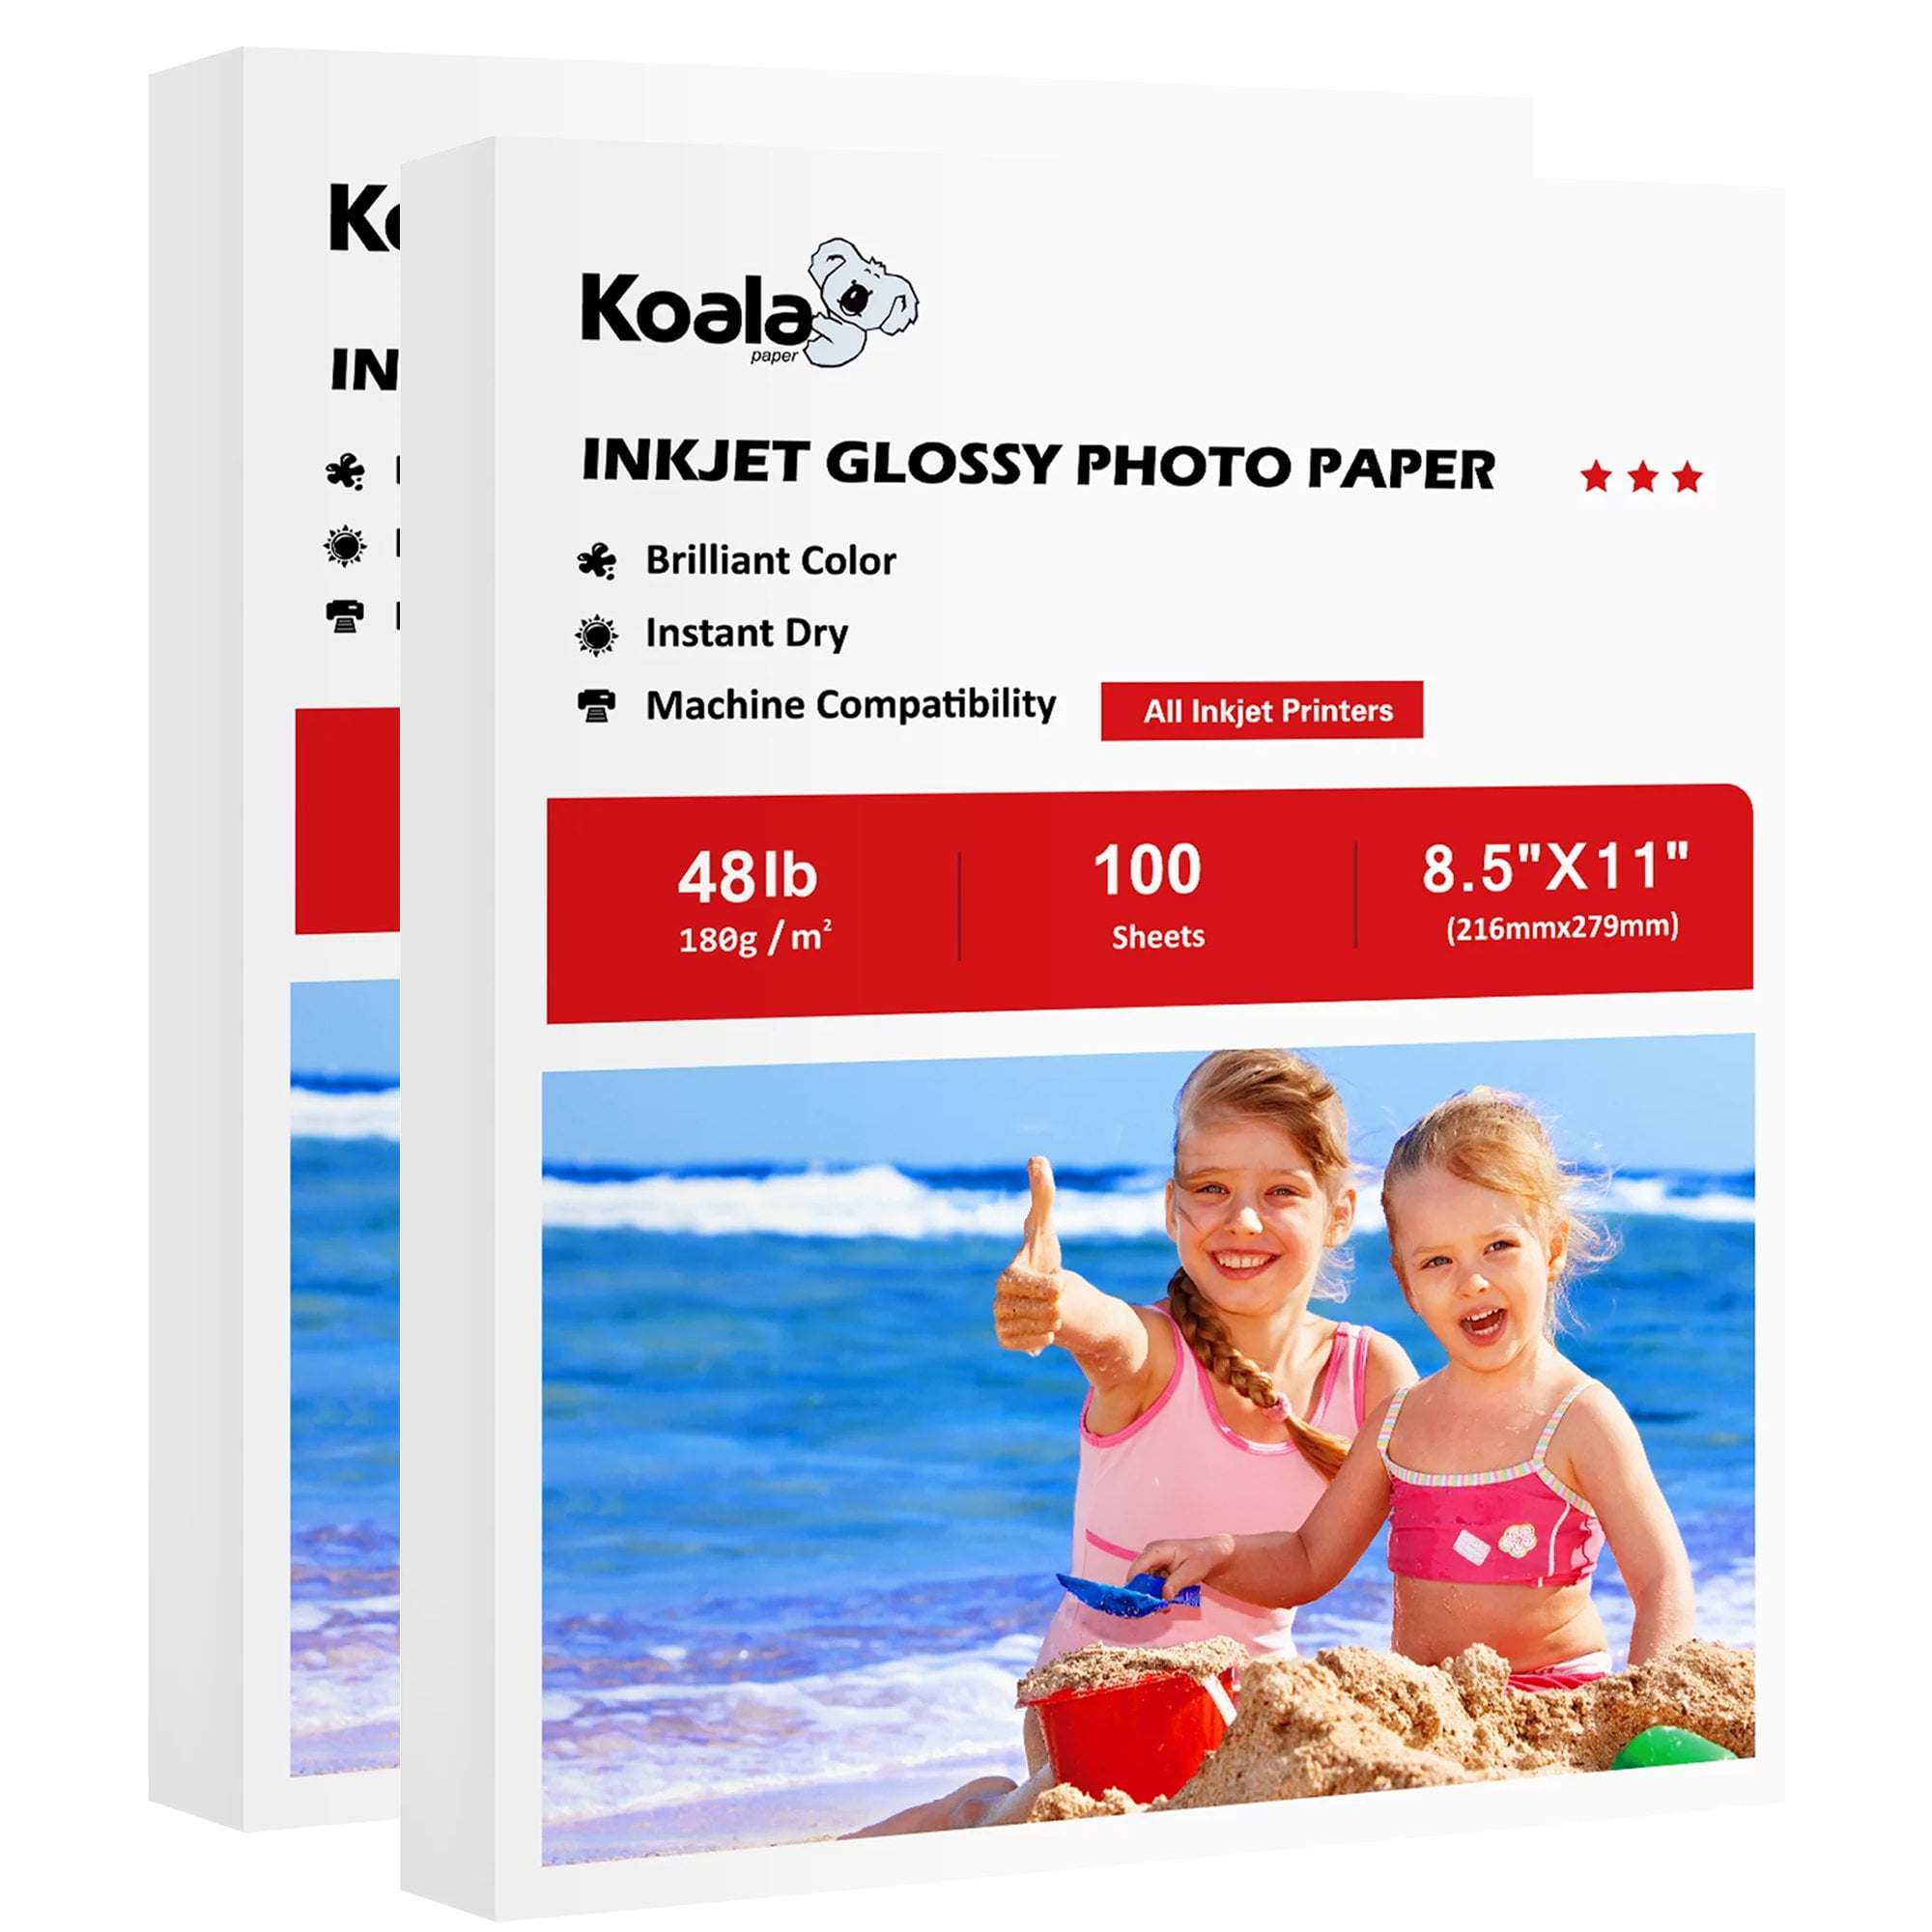 200 Sheets Bulk Koala Inkjet Photo Paper 8.5 x 11 Glossy Printer Paper 36lb 135g for Printing Pictures, Brochures, DIY Chip Bags, Flyers, Party Supply